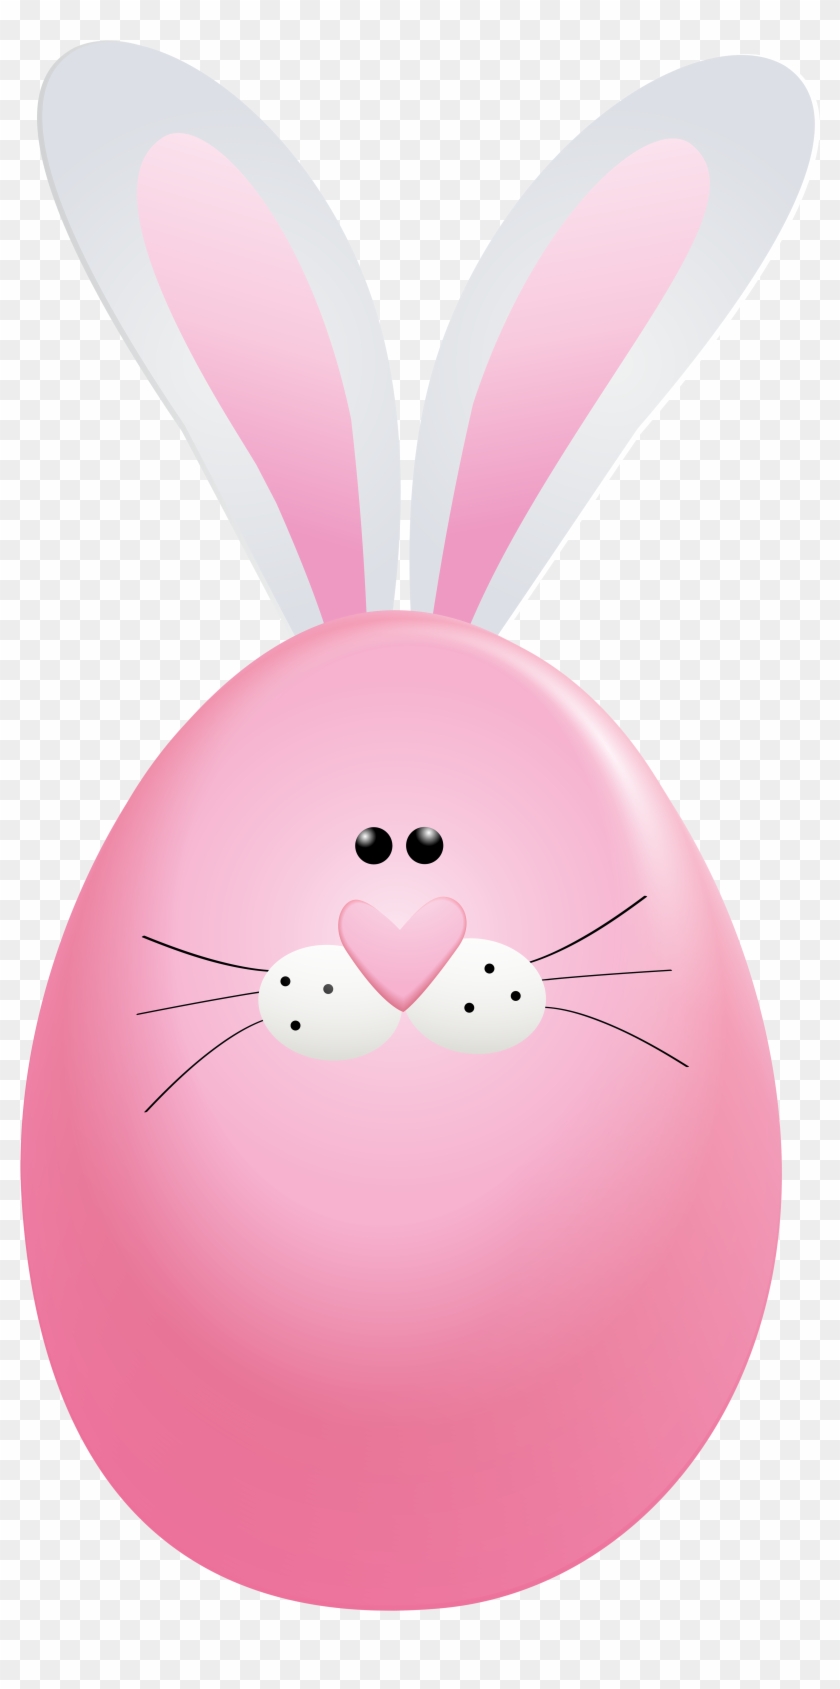 Bunny Png Clip Art Image Gallery Yopriceville - Rabbit Transparent Png #573210